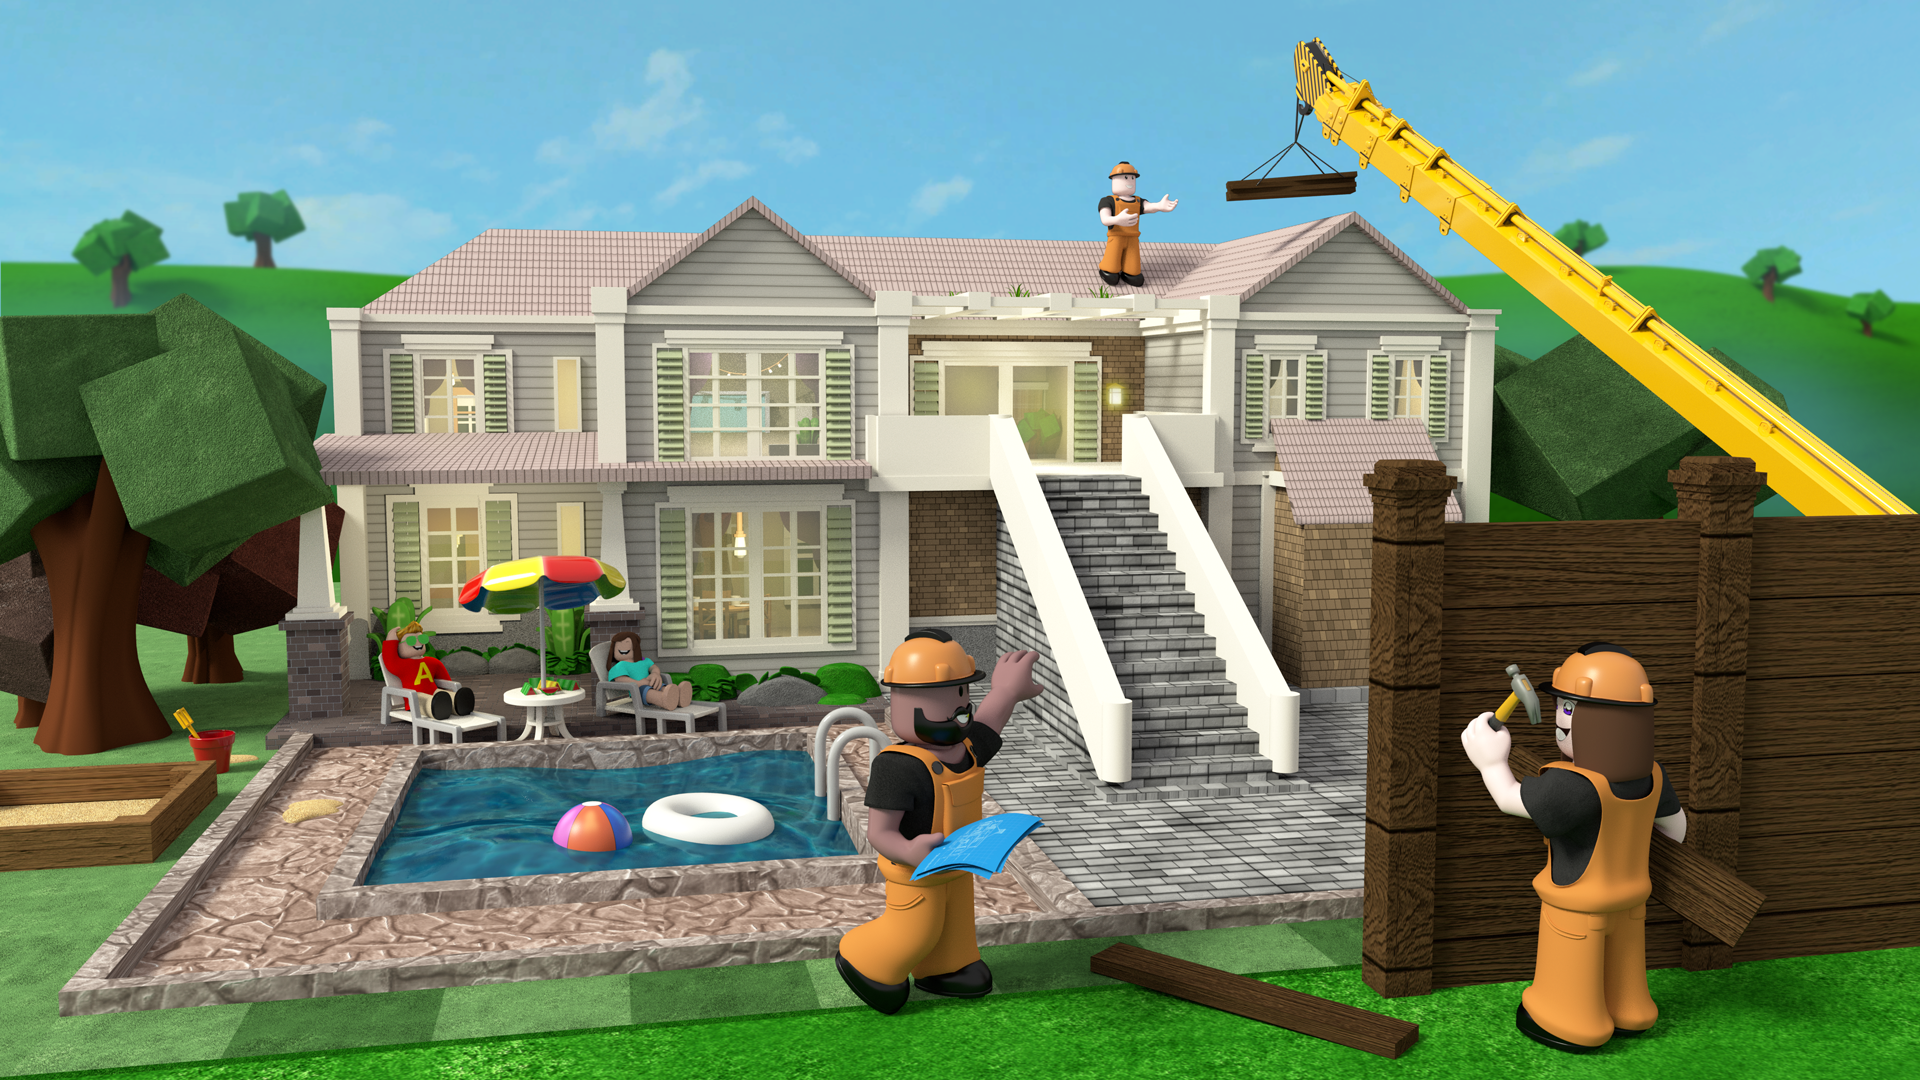 Welcome to Bloxburg in Roblox